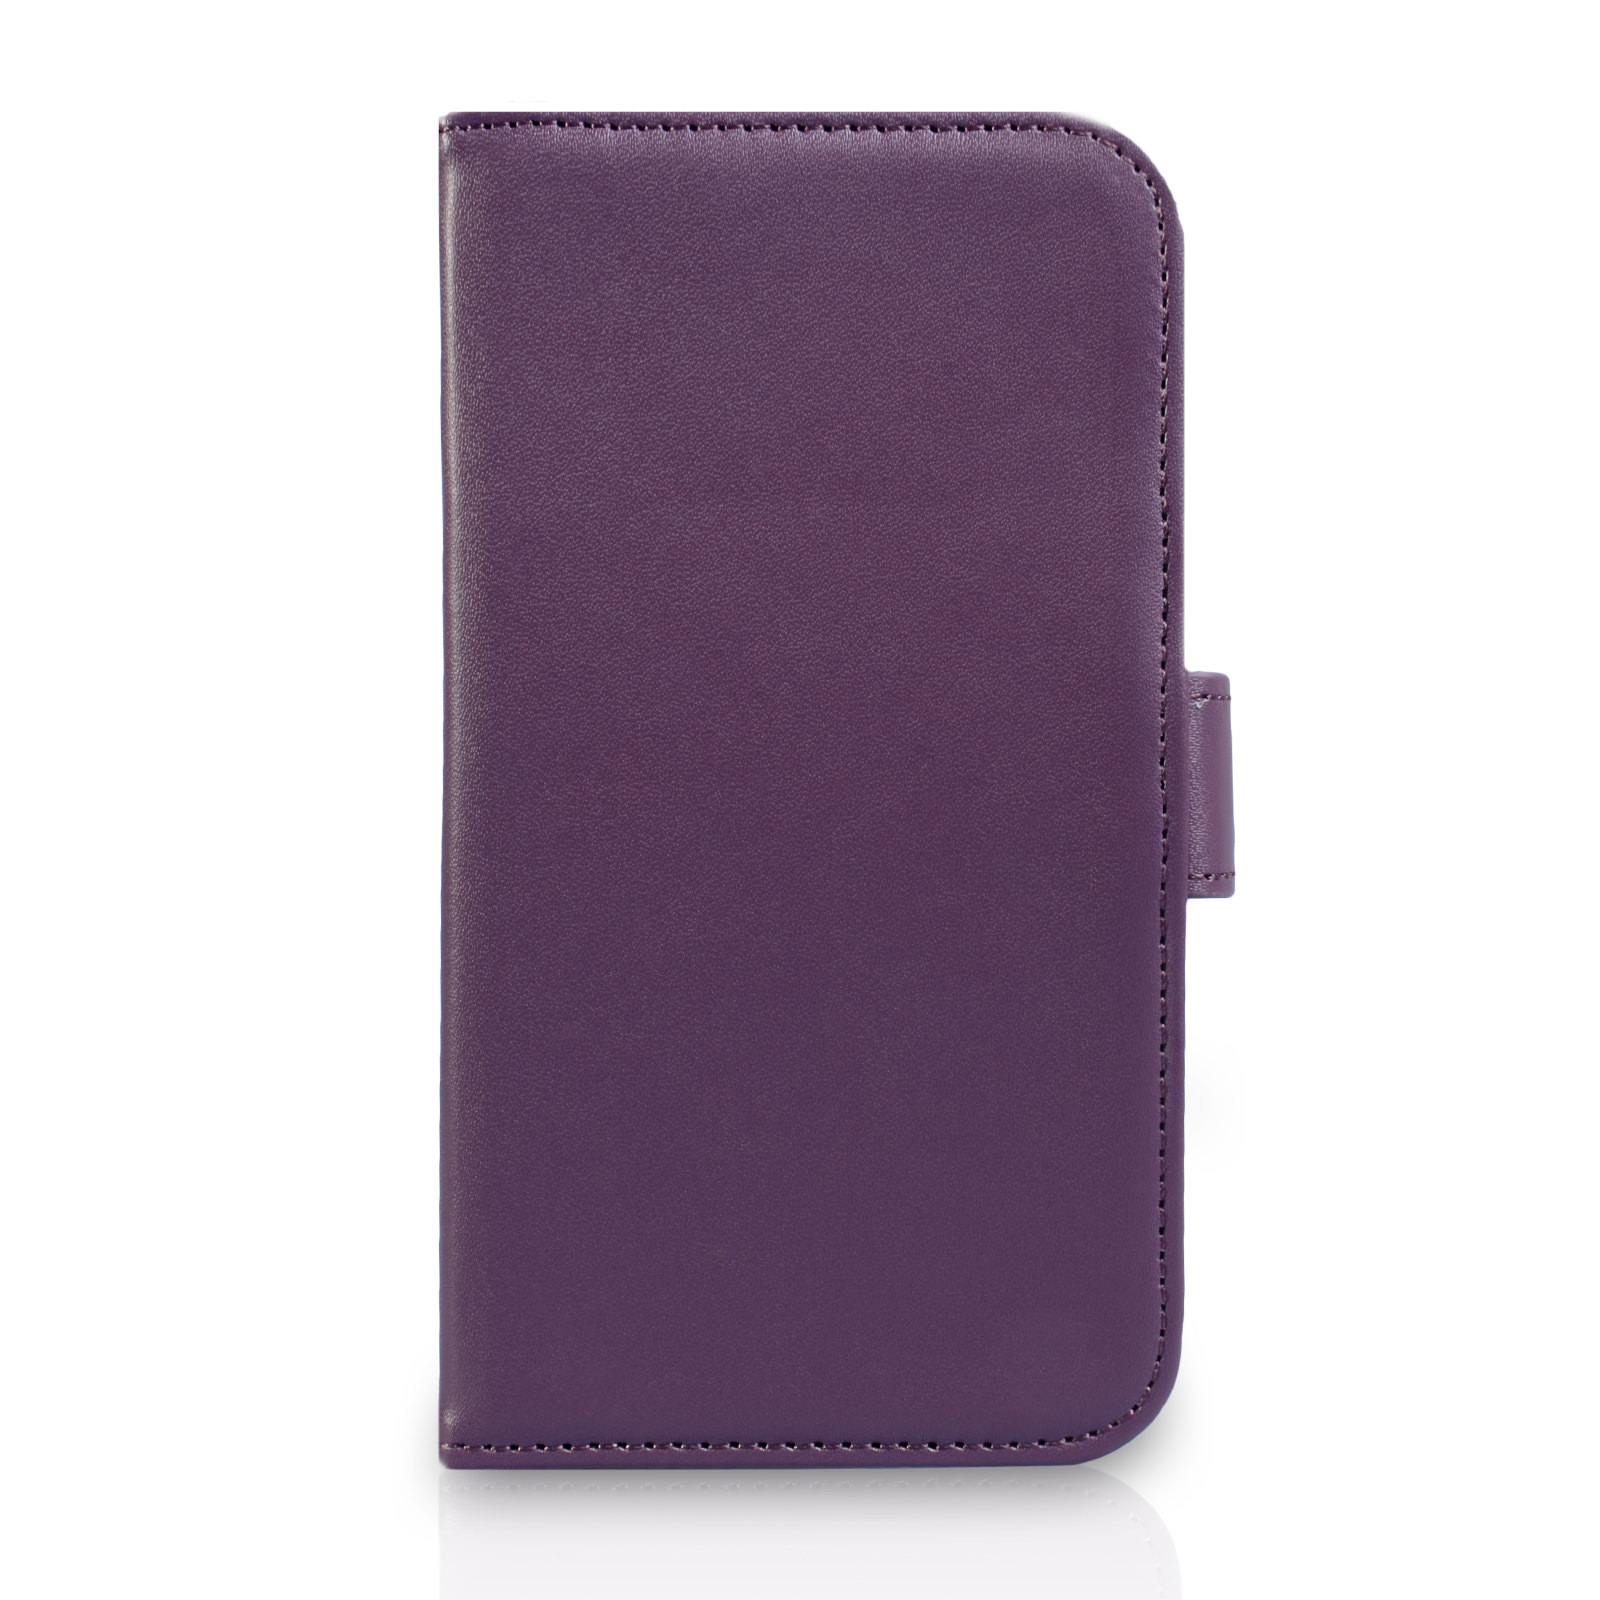 YouSave Samsung Galaxy S5 Leather-Effect Wallet Case - Purple